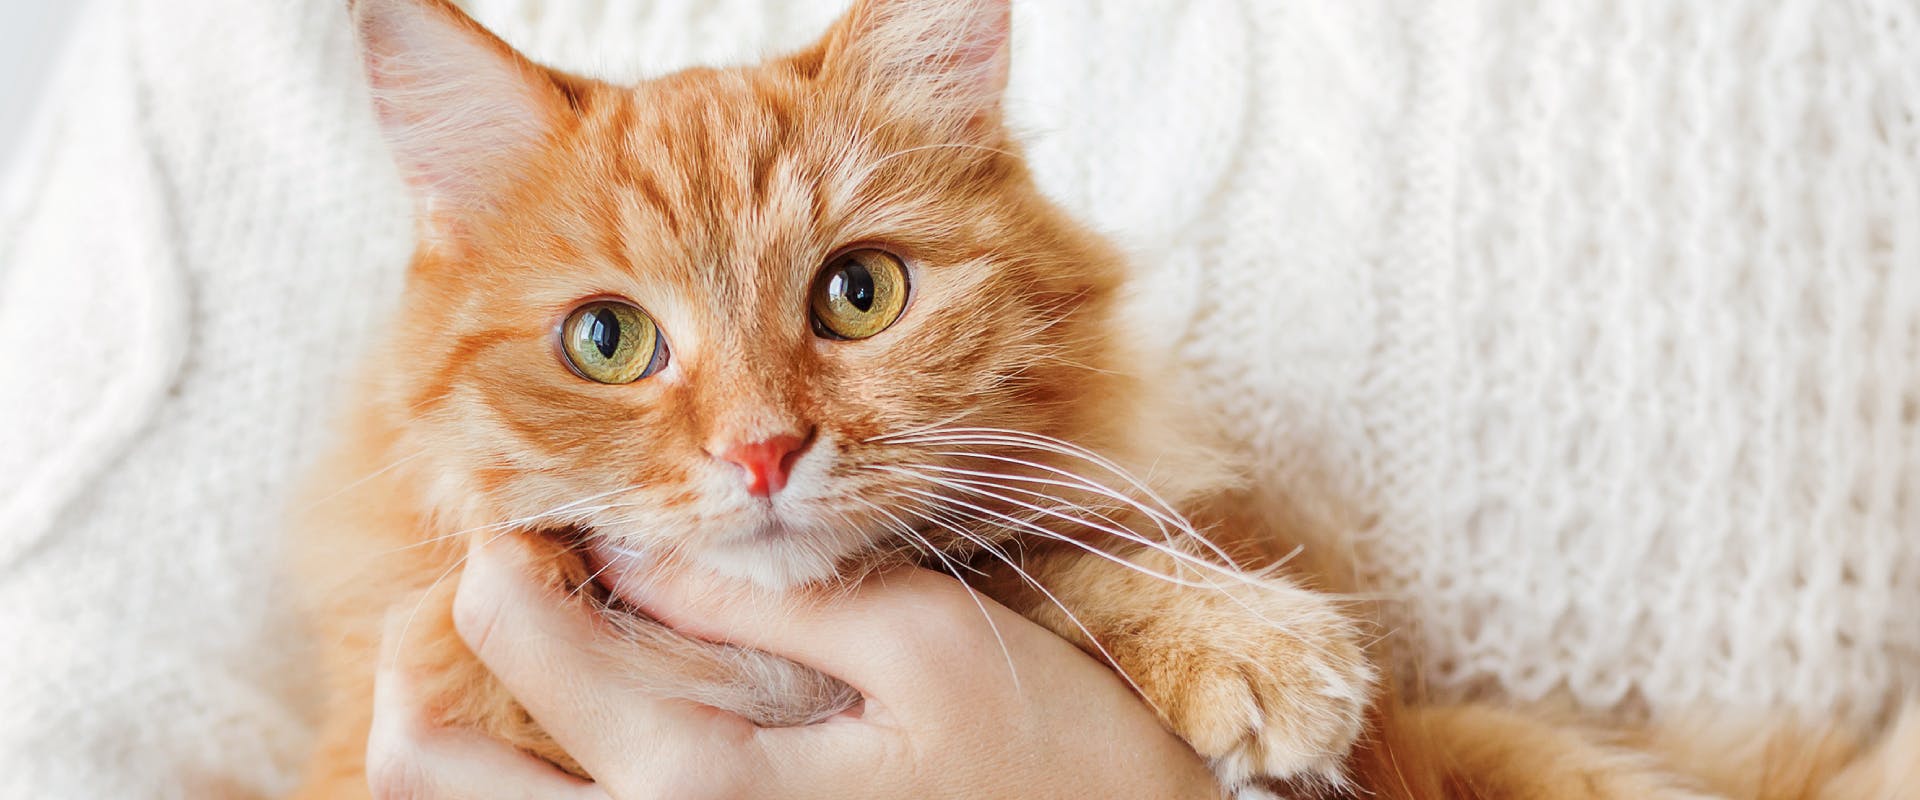 A ginger cat being held.